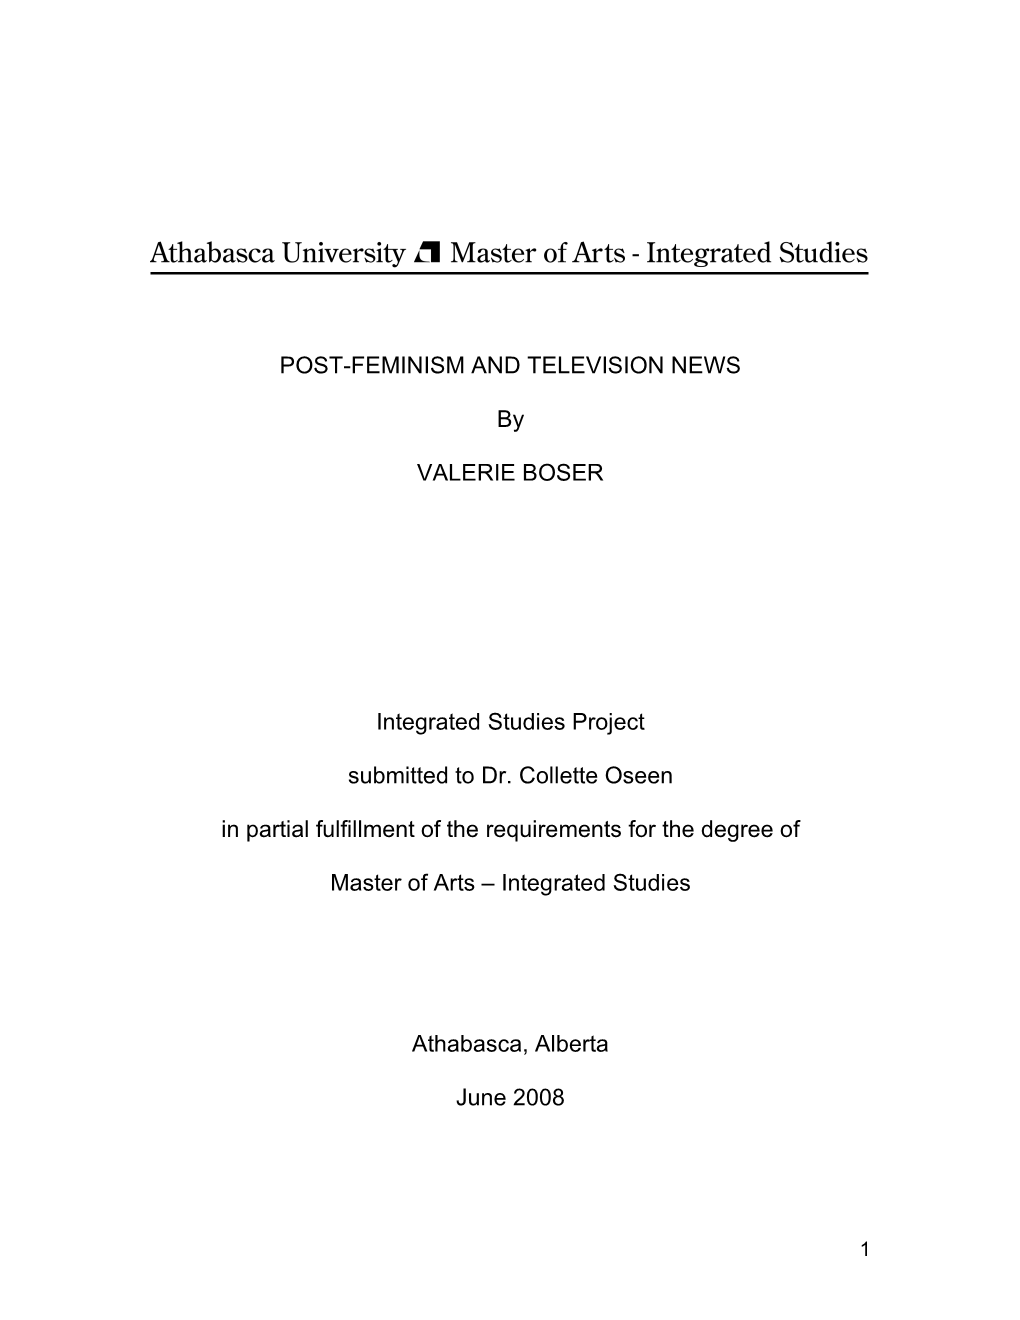 POST-FEMINISM and TELEVISION NEWS by VALERIE BOSER Integrated Studies Project Submitted to Dr. Collette Oseen in Partial Fulfil